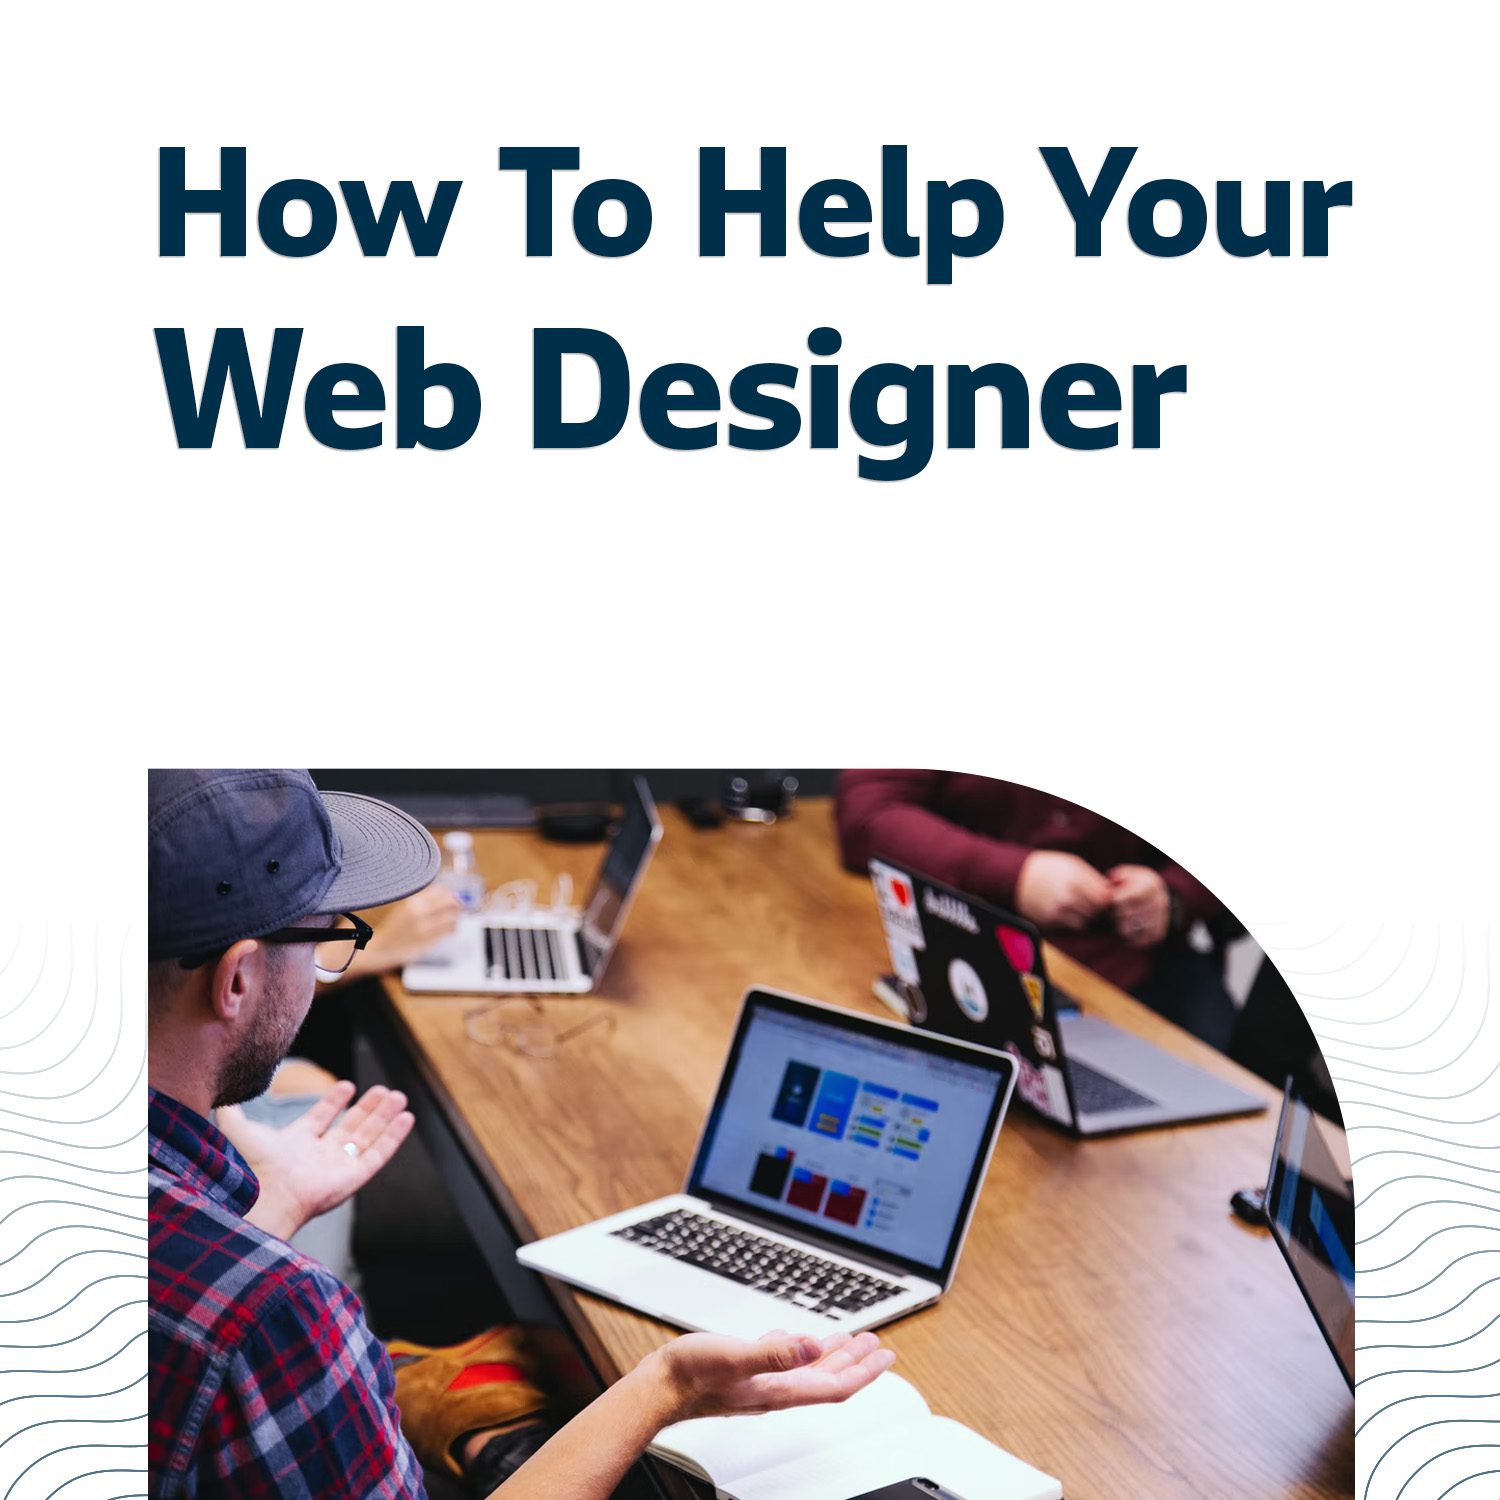 Working With a Web Designer